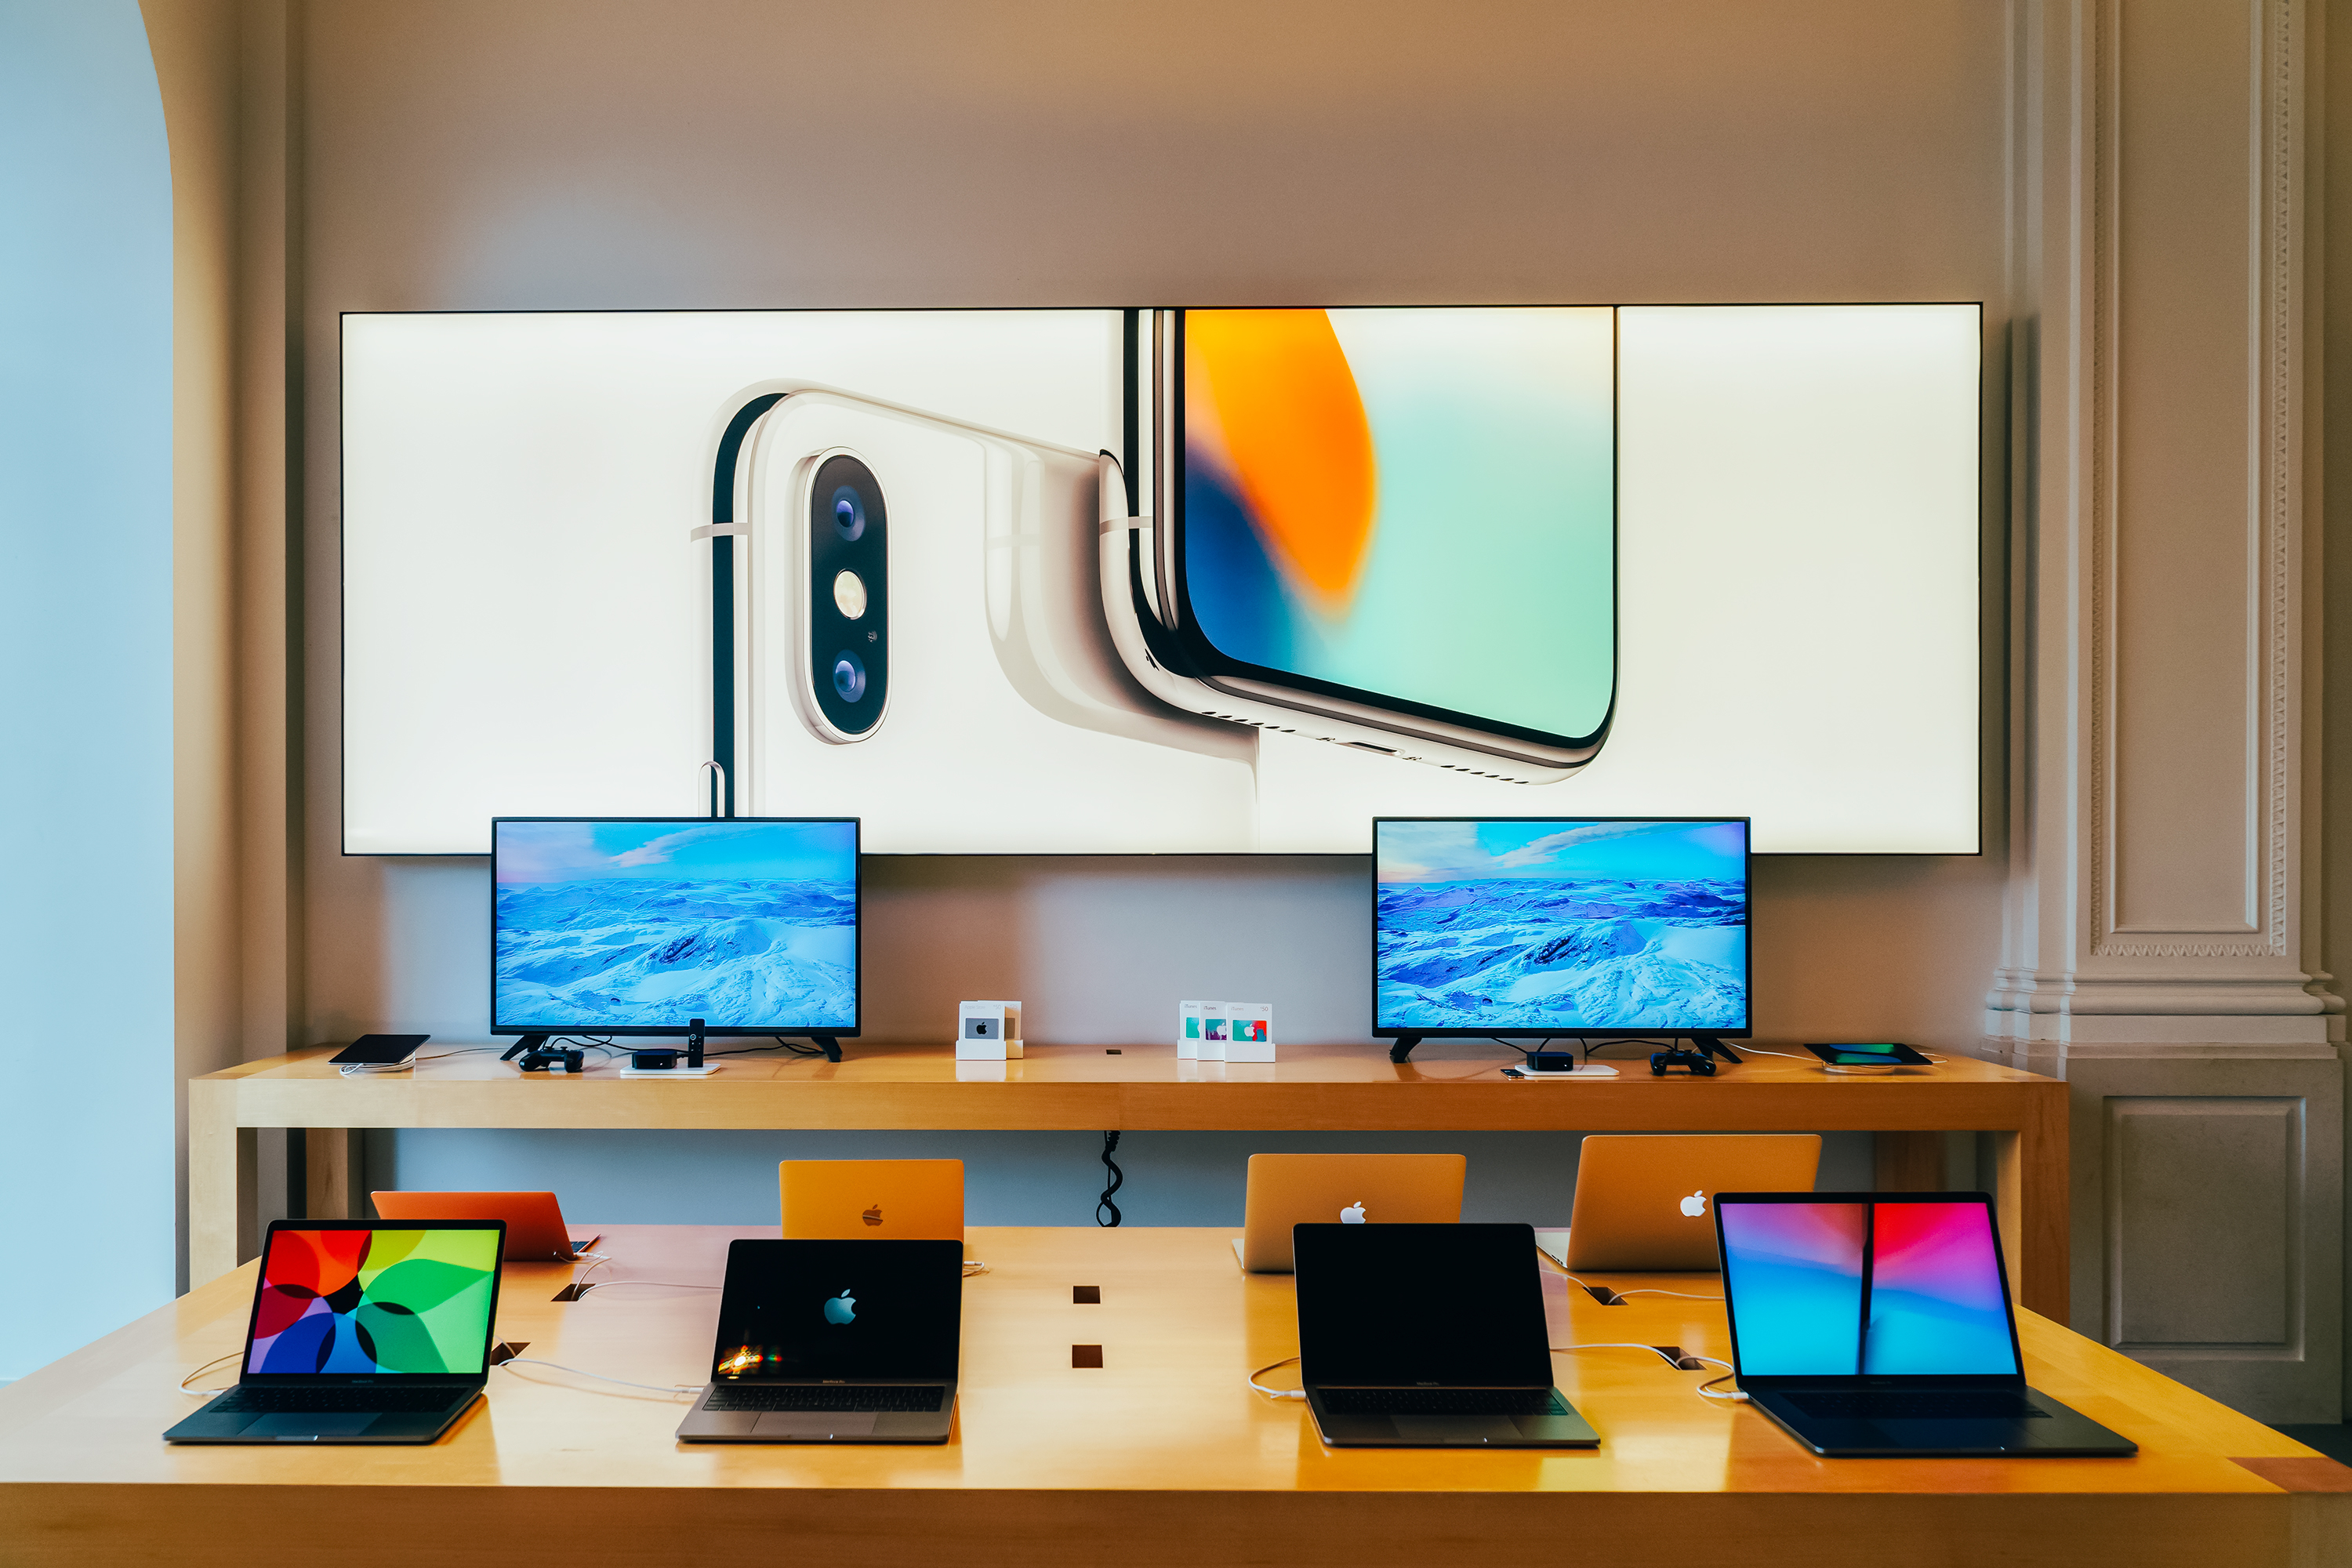 Apple store display with different MacBooks sitting on a table